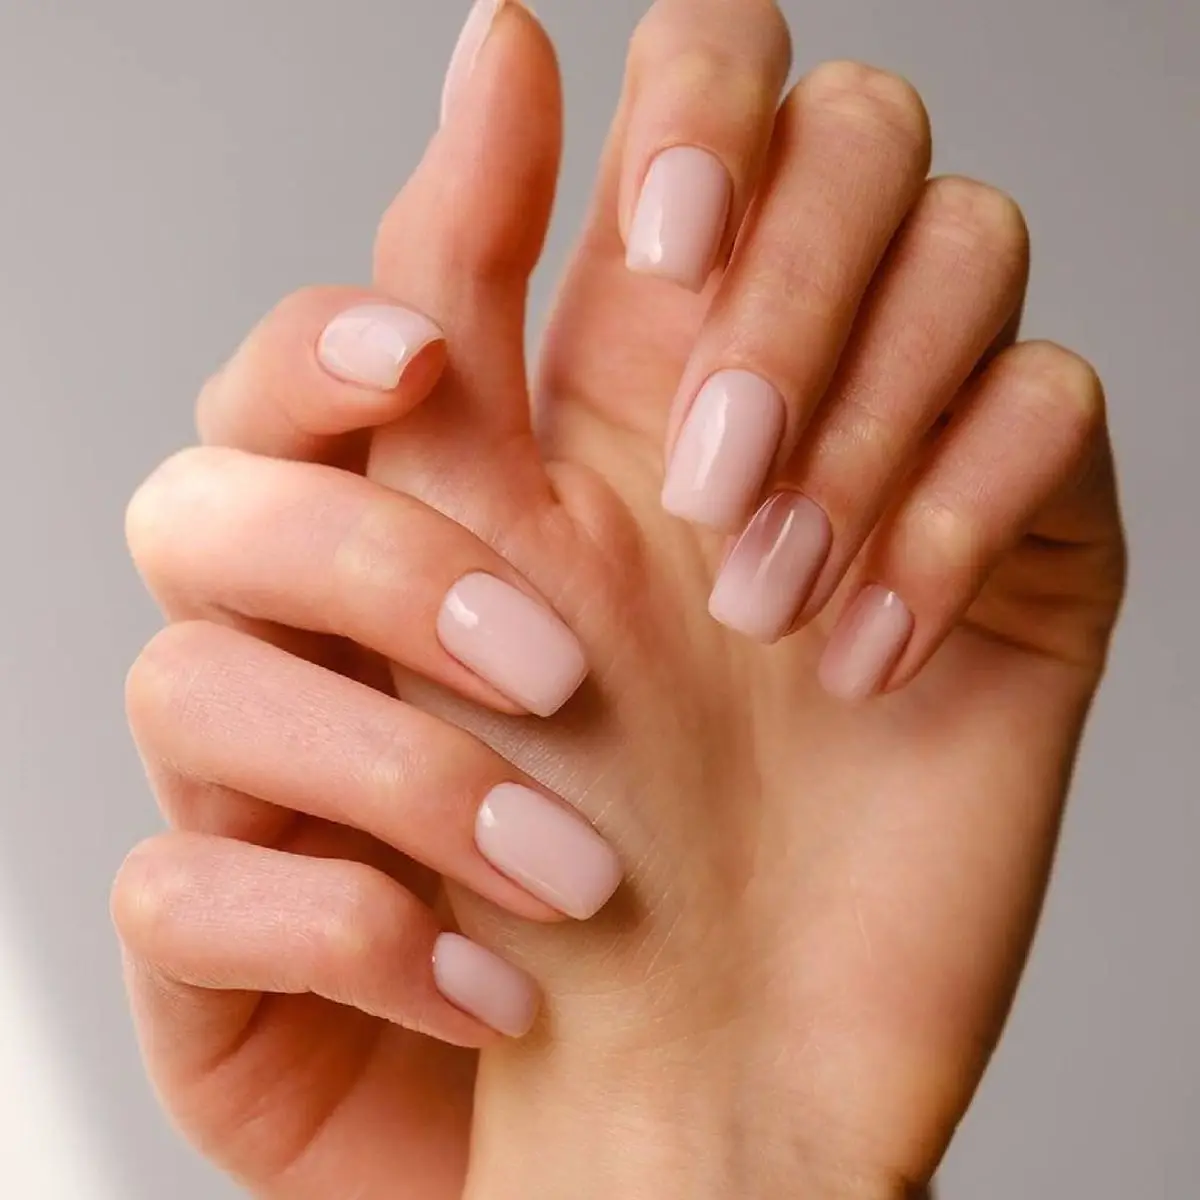 7 Helpful Ways You Can Strengthen Dry and Brittle Nails ...